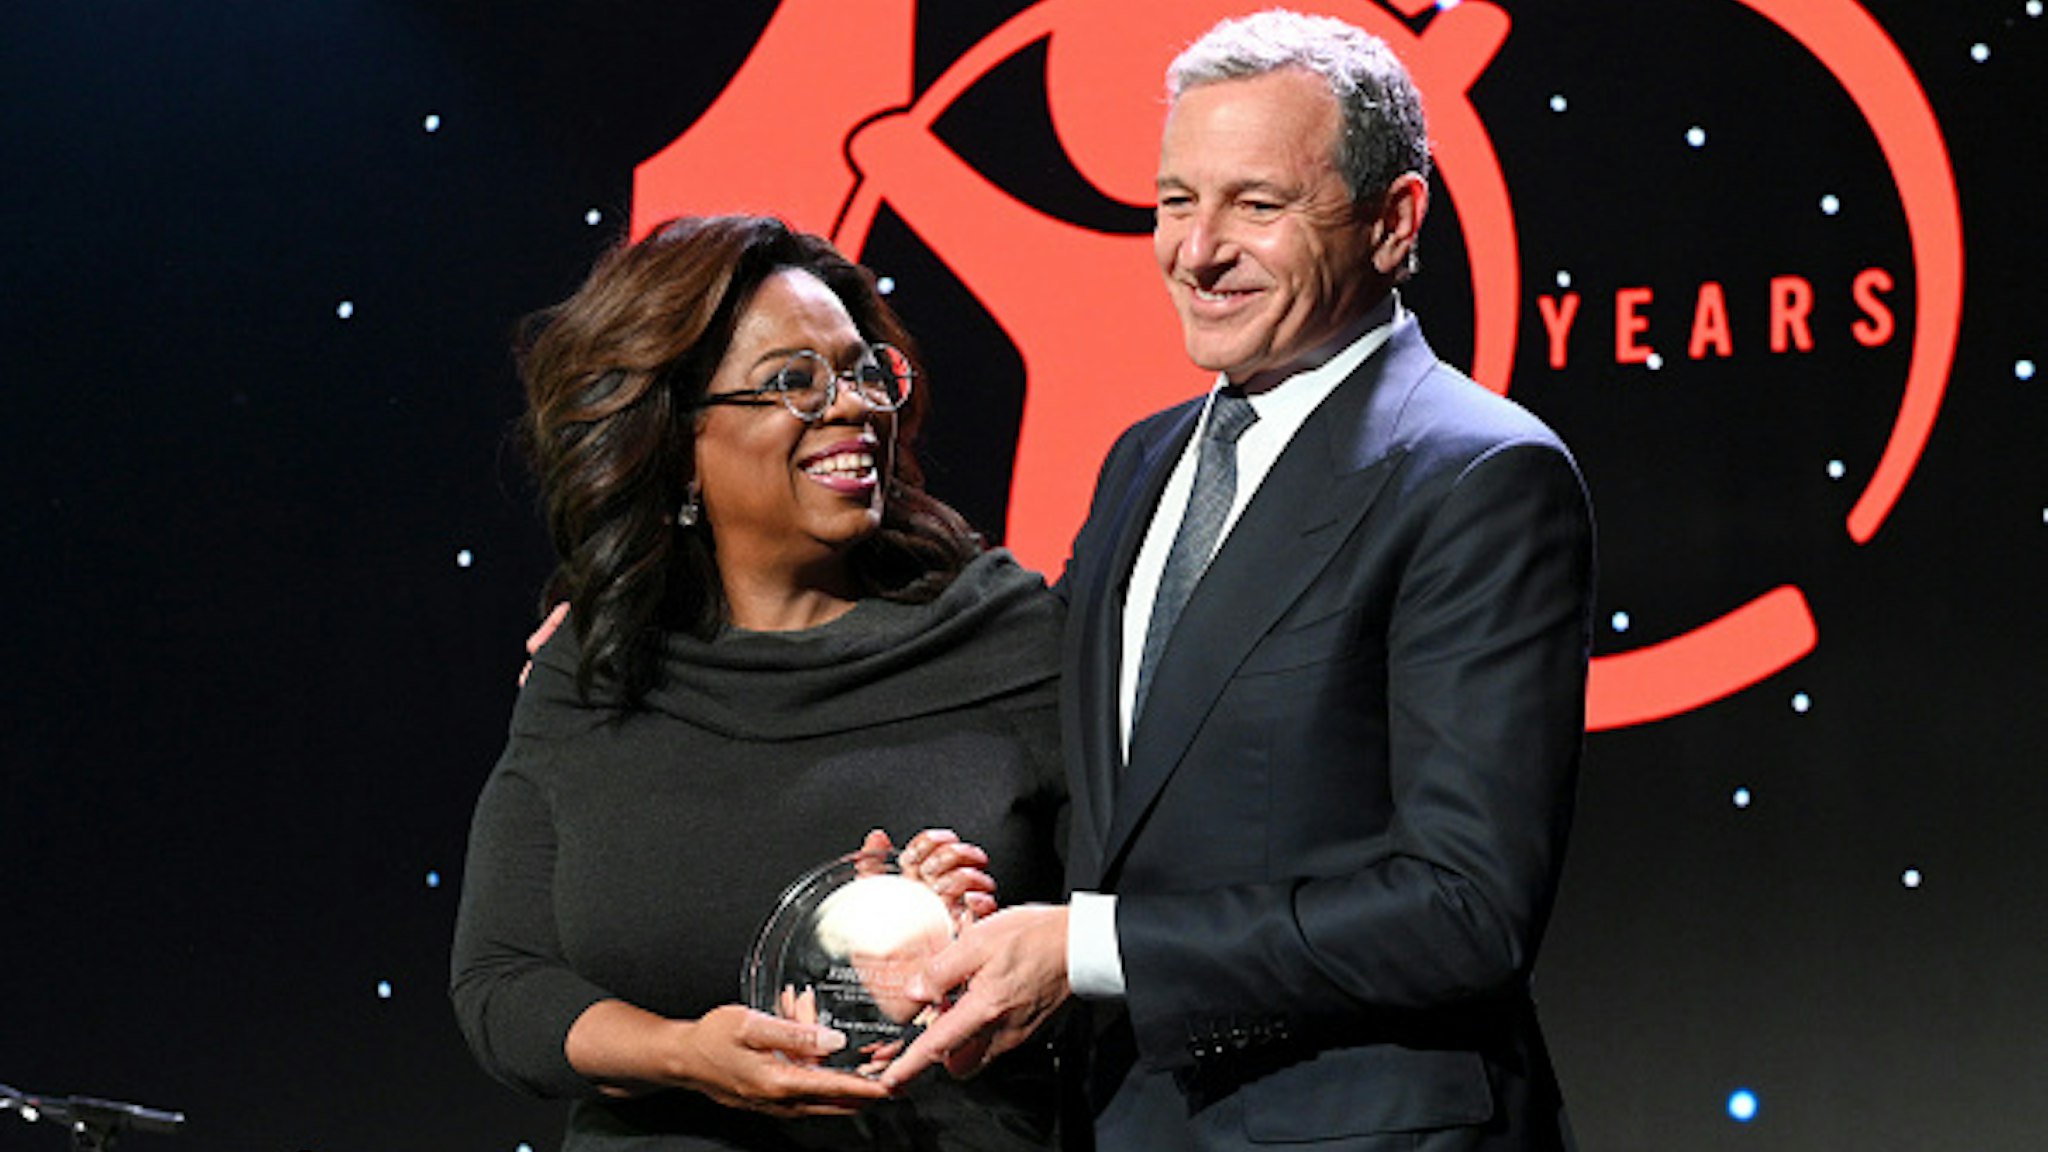 BEVERLY HILLS, CALIFORNIA - OCTOBER 02: Centennial Award Honoree, Robert A. Iger accepts the award from Oprah Winfrey onstage during the Save The Children's Centennial Celebration: Once in a Lifetime at The Beverly Hilton Hotel on October 02, 2019 in Beverly Hills, California.